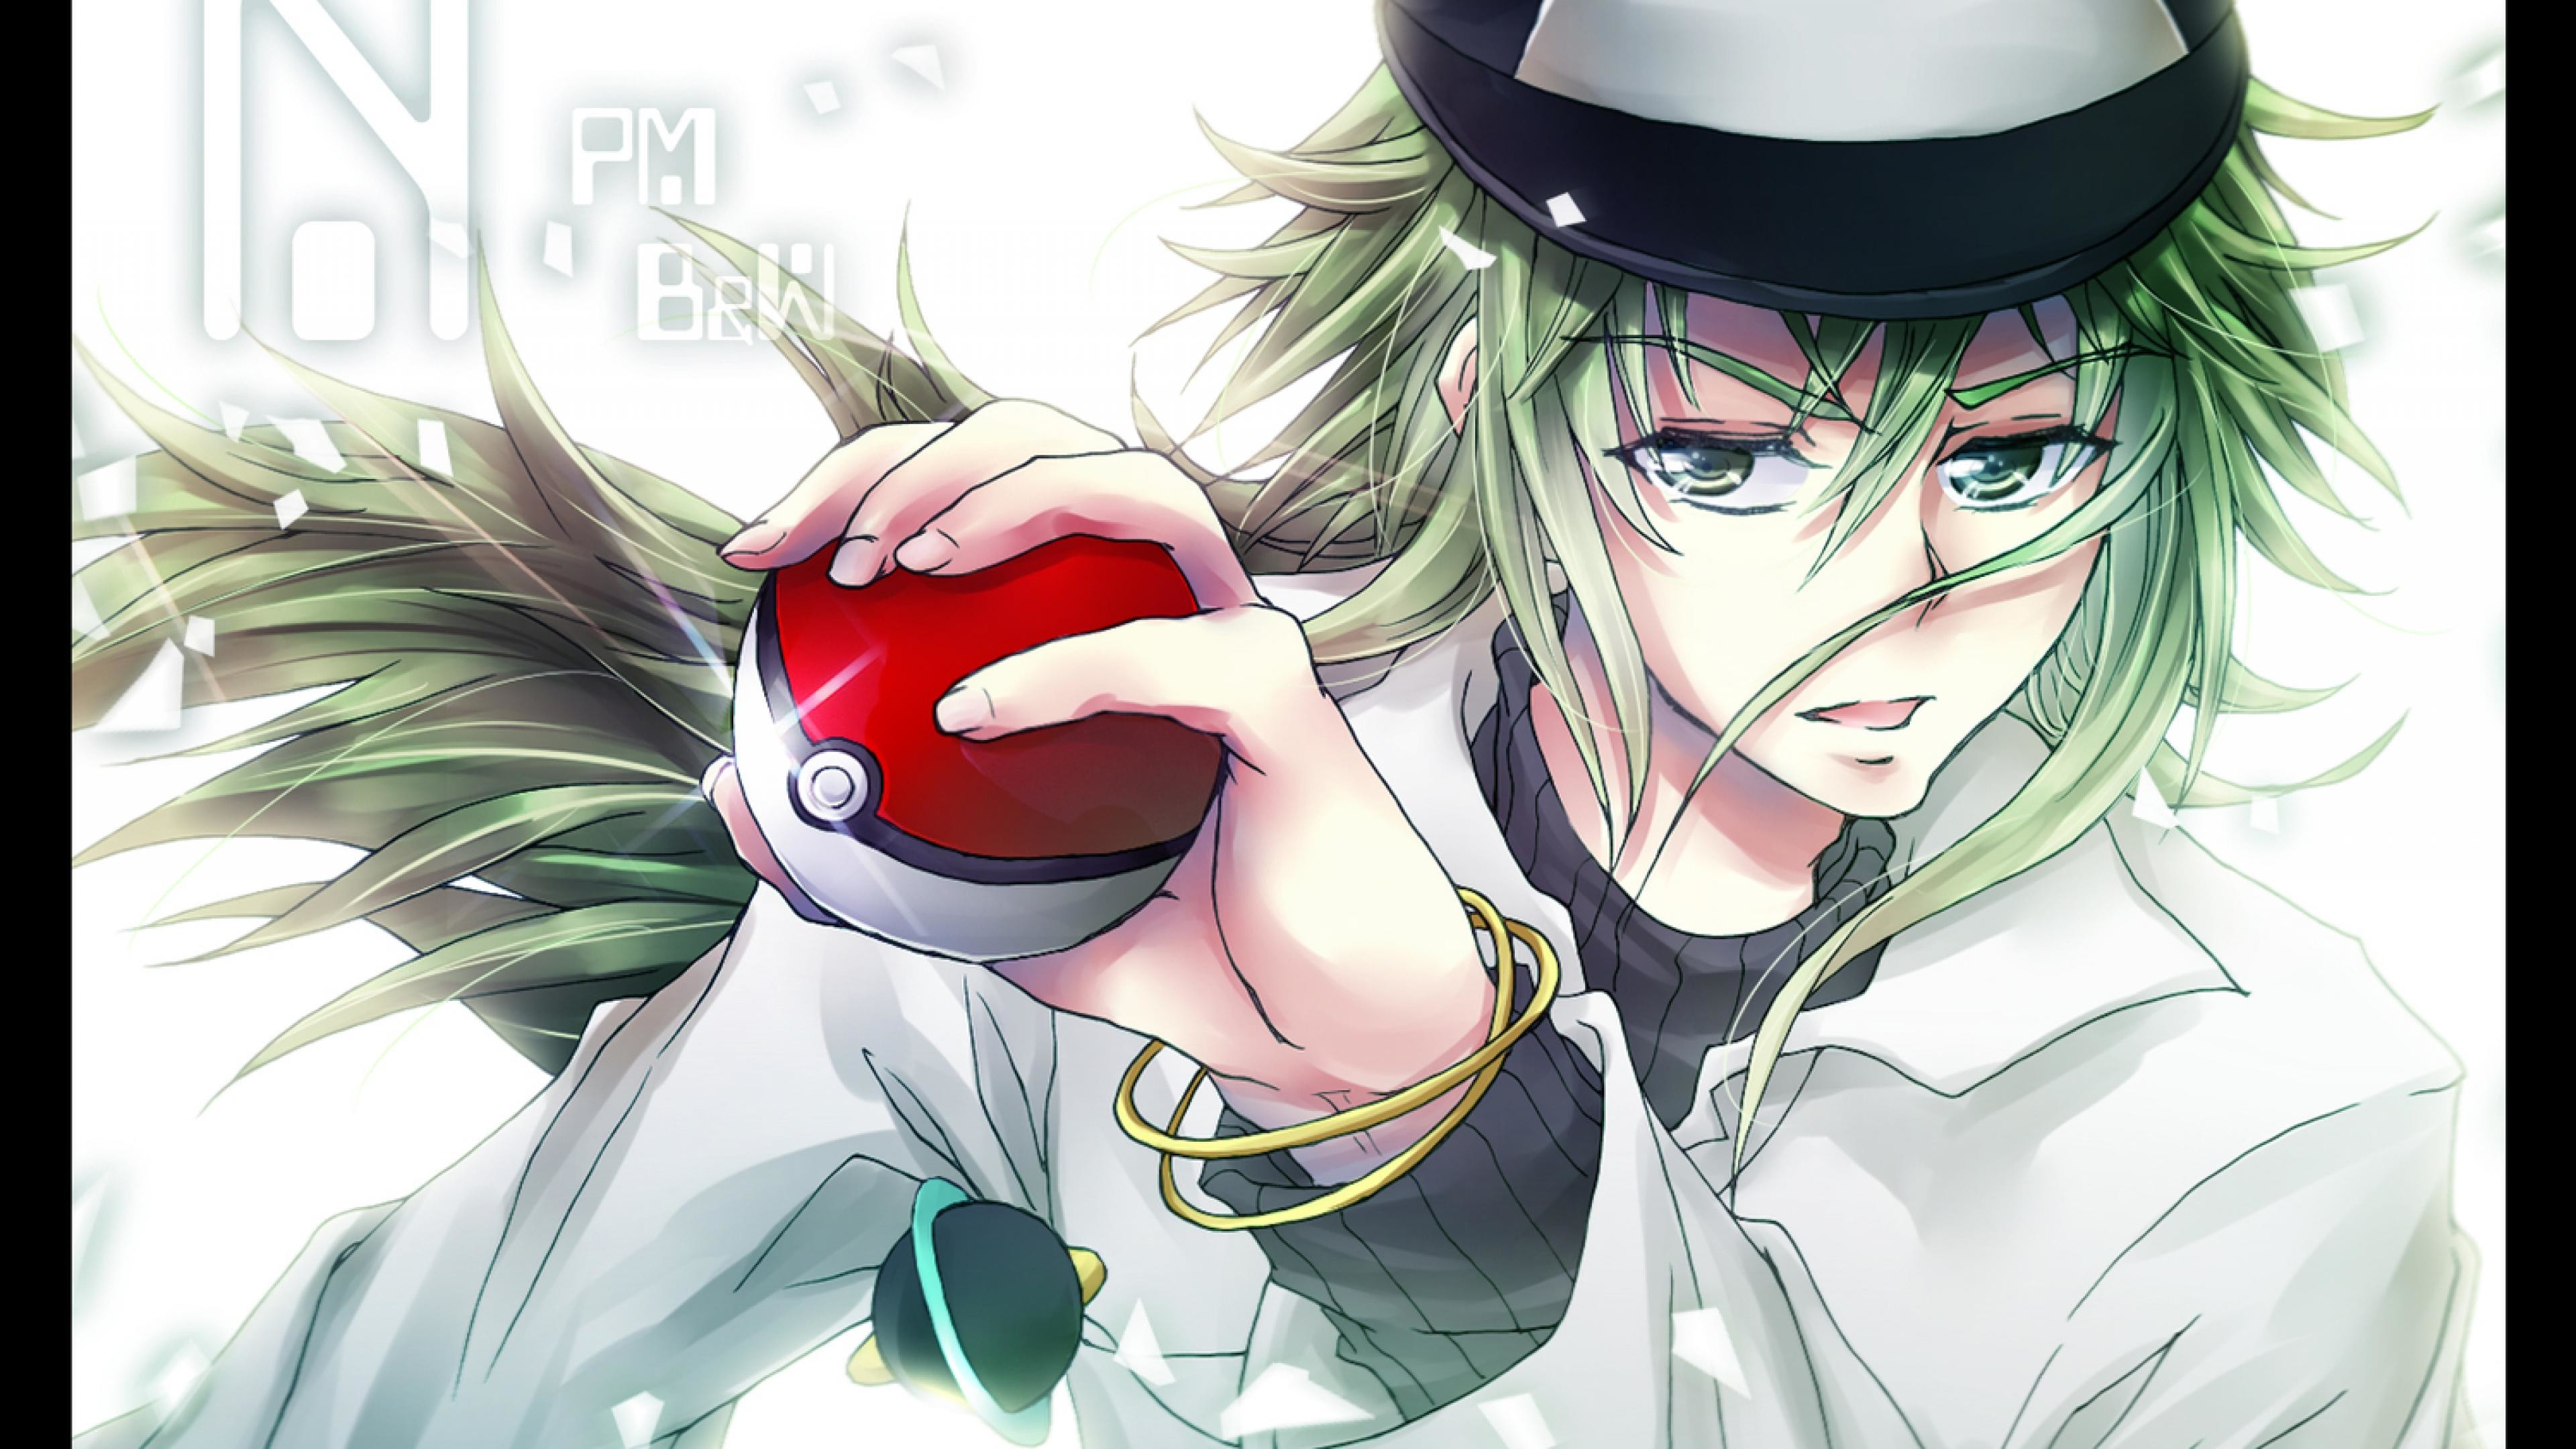 3840x2160 pokemon trainer green wallpaper wide with high resolution wallpaper on  anime category similar with character gold